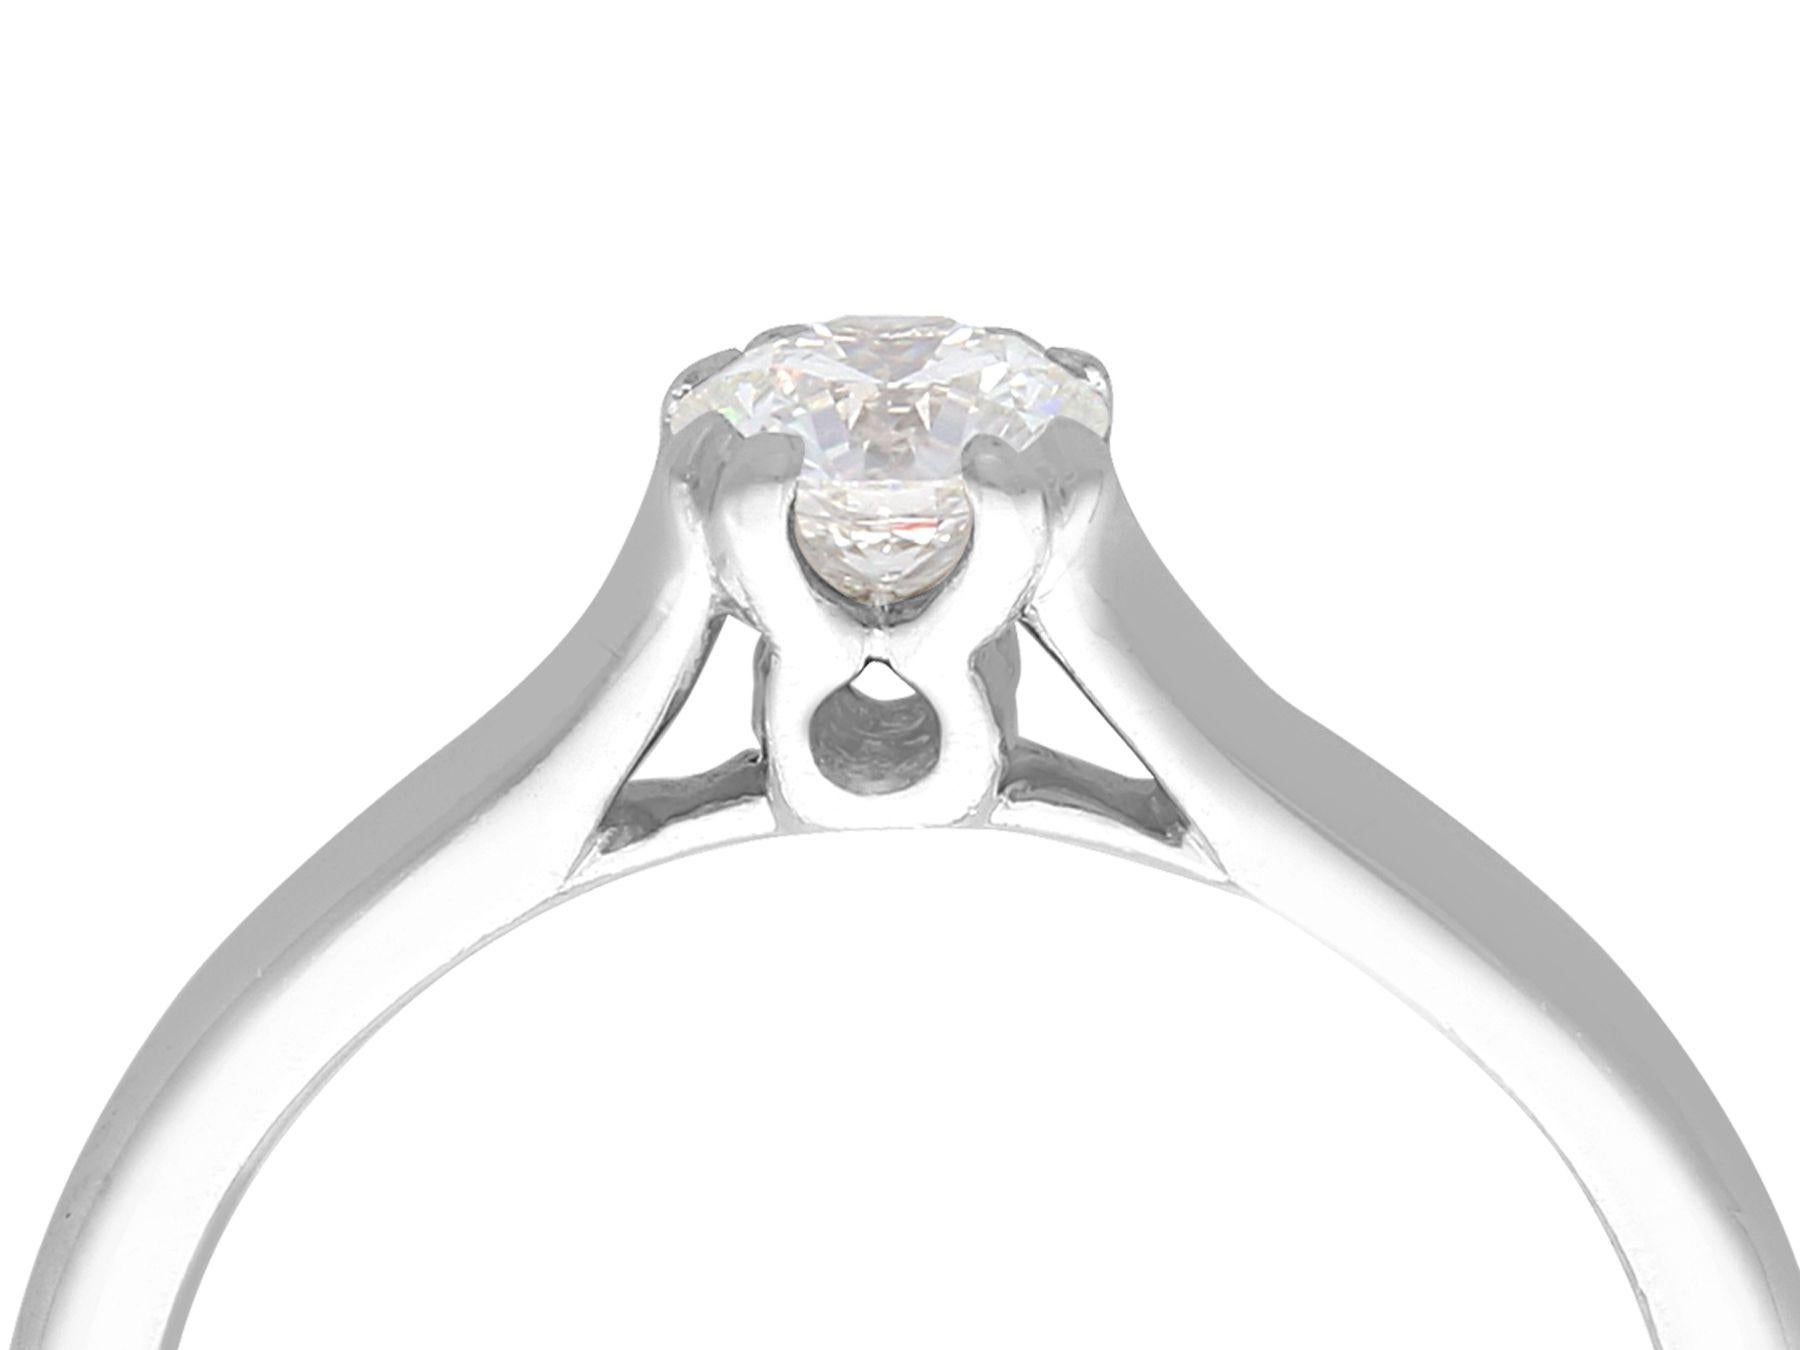 A fine and impressive vintage 0.38 carat diamond and platinum solitaire ring; part of our diamond jewelry/estate jewelry collections.

This impressive diamond solitaire ring has been crafted in platinum.

The vintage 0.38Ct modern brilliant round